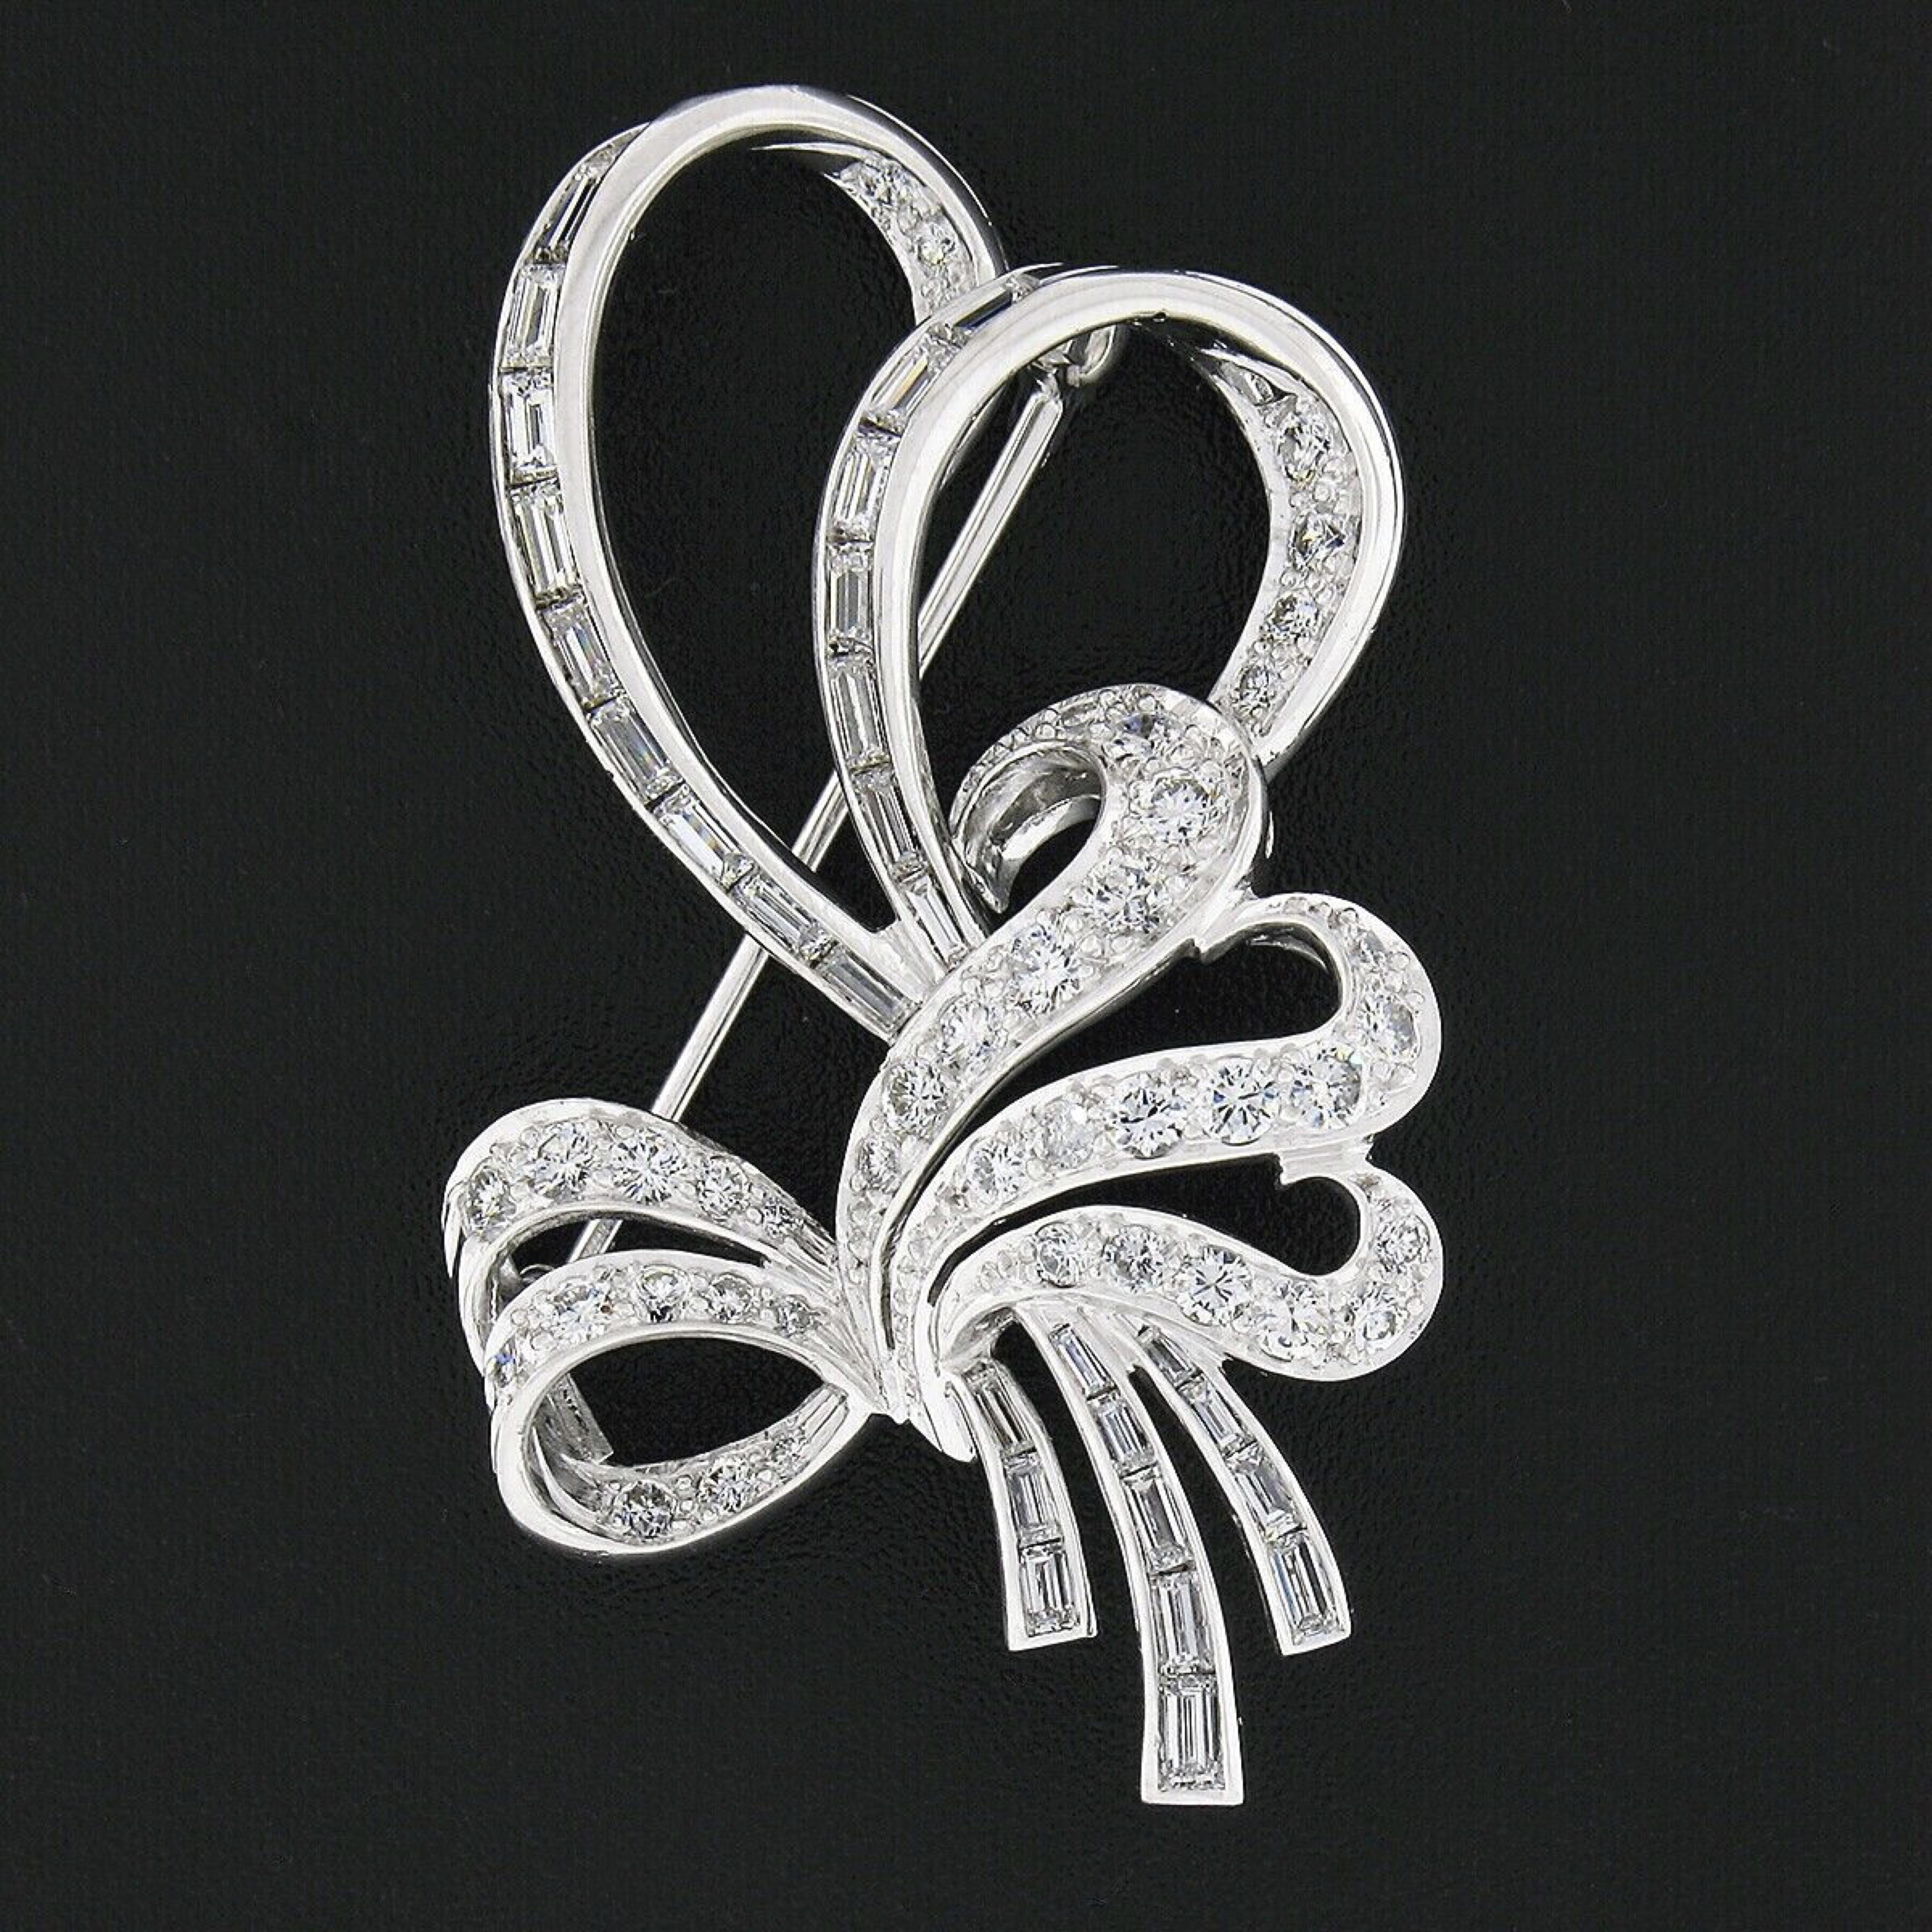 This magnificent, all original, vintage brooch was crafted from solid platinum and is completely drenched with stunning diamonds throughout its elegant, open, bow and ribbon design. These super fiery diamonds bring a truly glamorous look to this